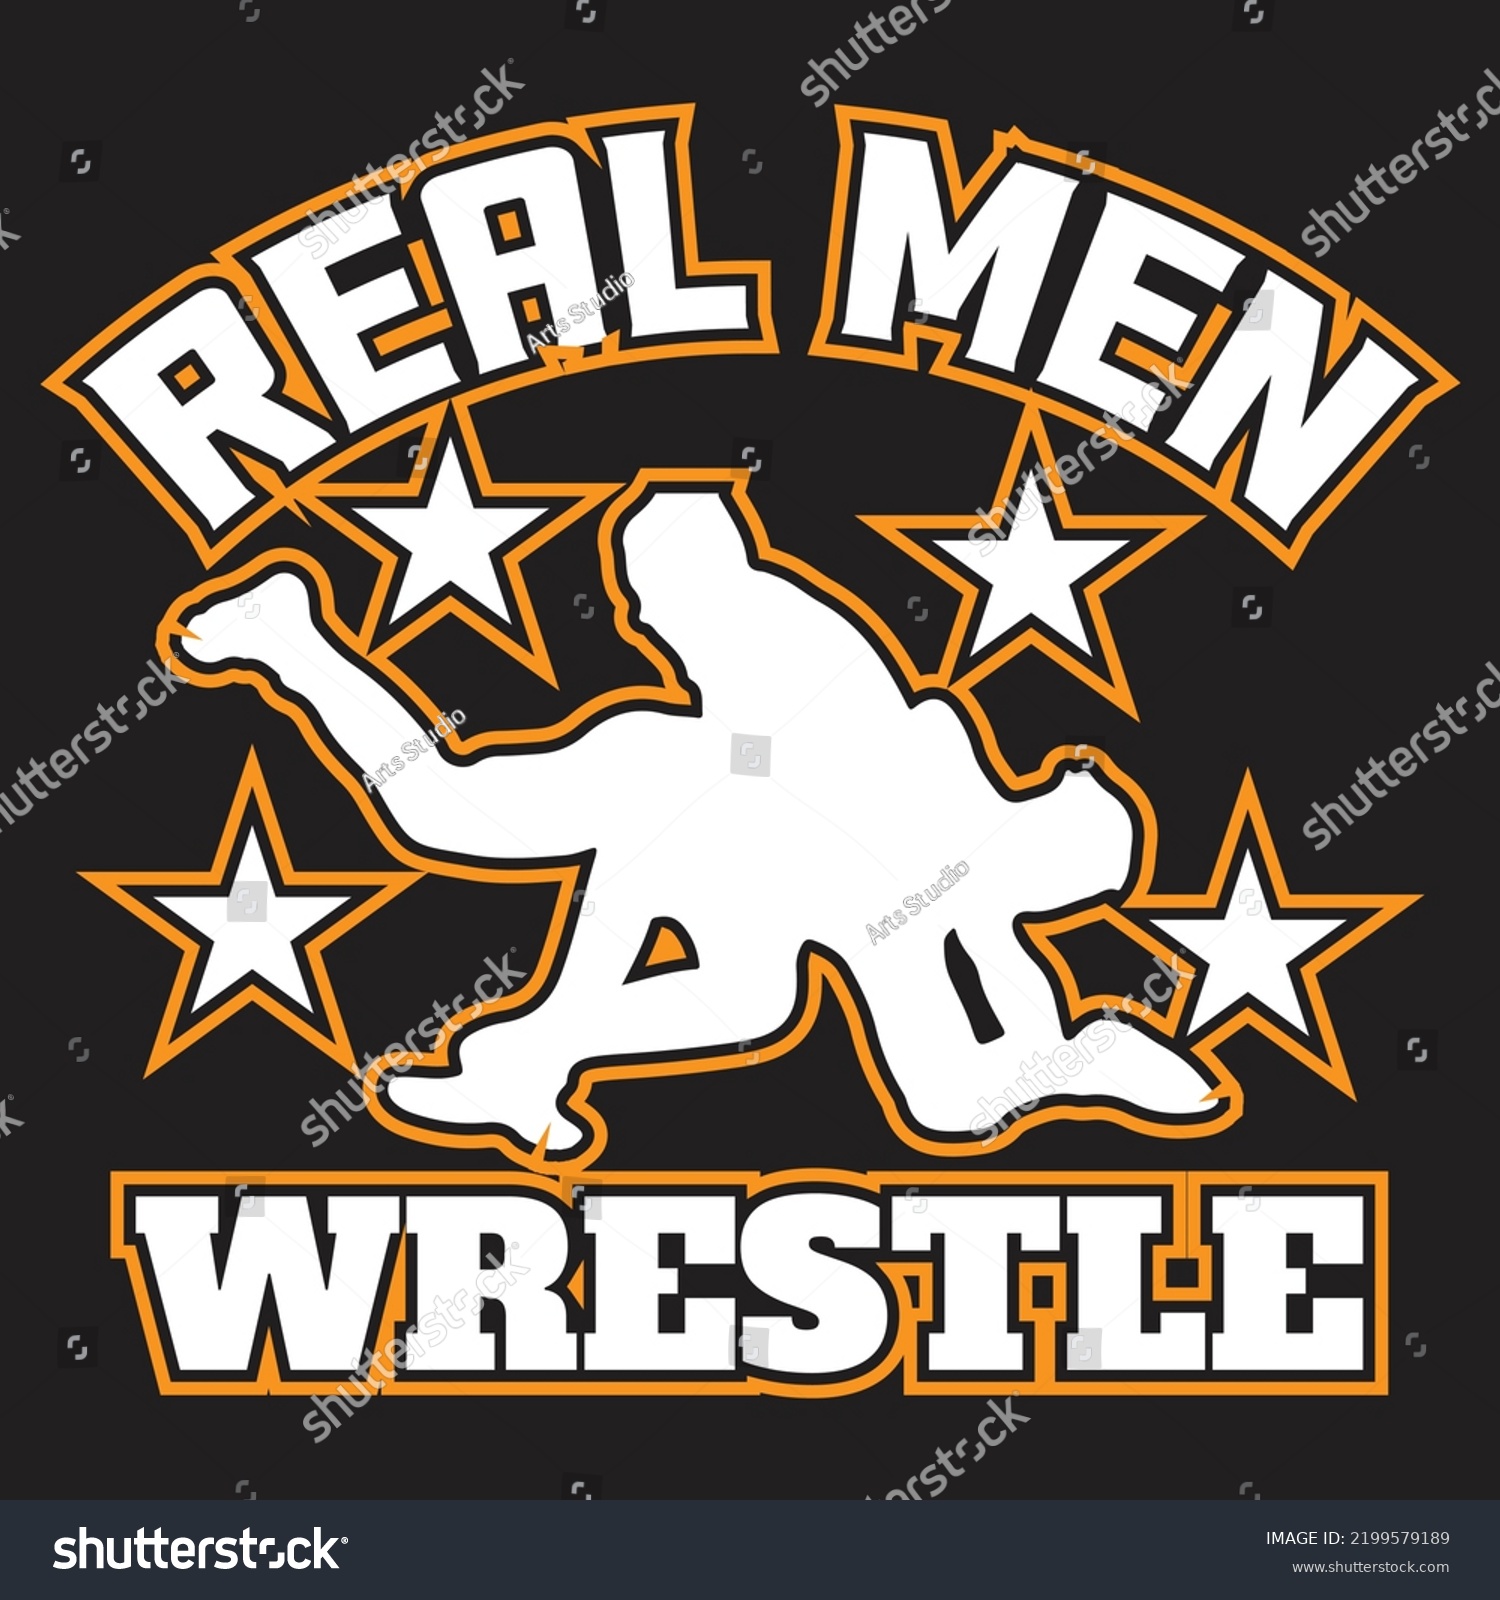 SVG of Real Men Wrestle - Sports and Athletic T-shirt Design Template Vector and Sports vector illustration. Vector EPS Editable File Bundle, can you download this file. svg